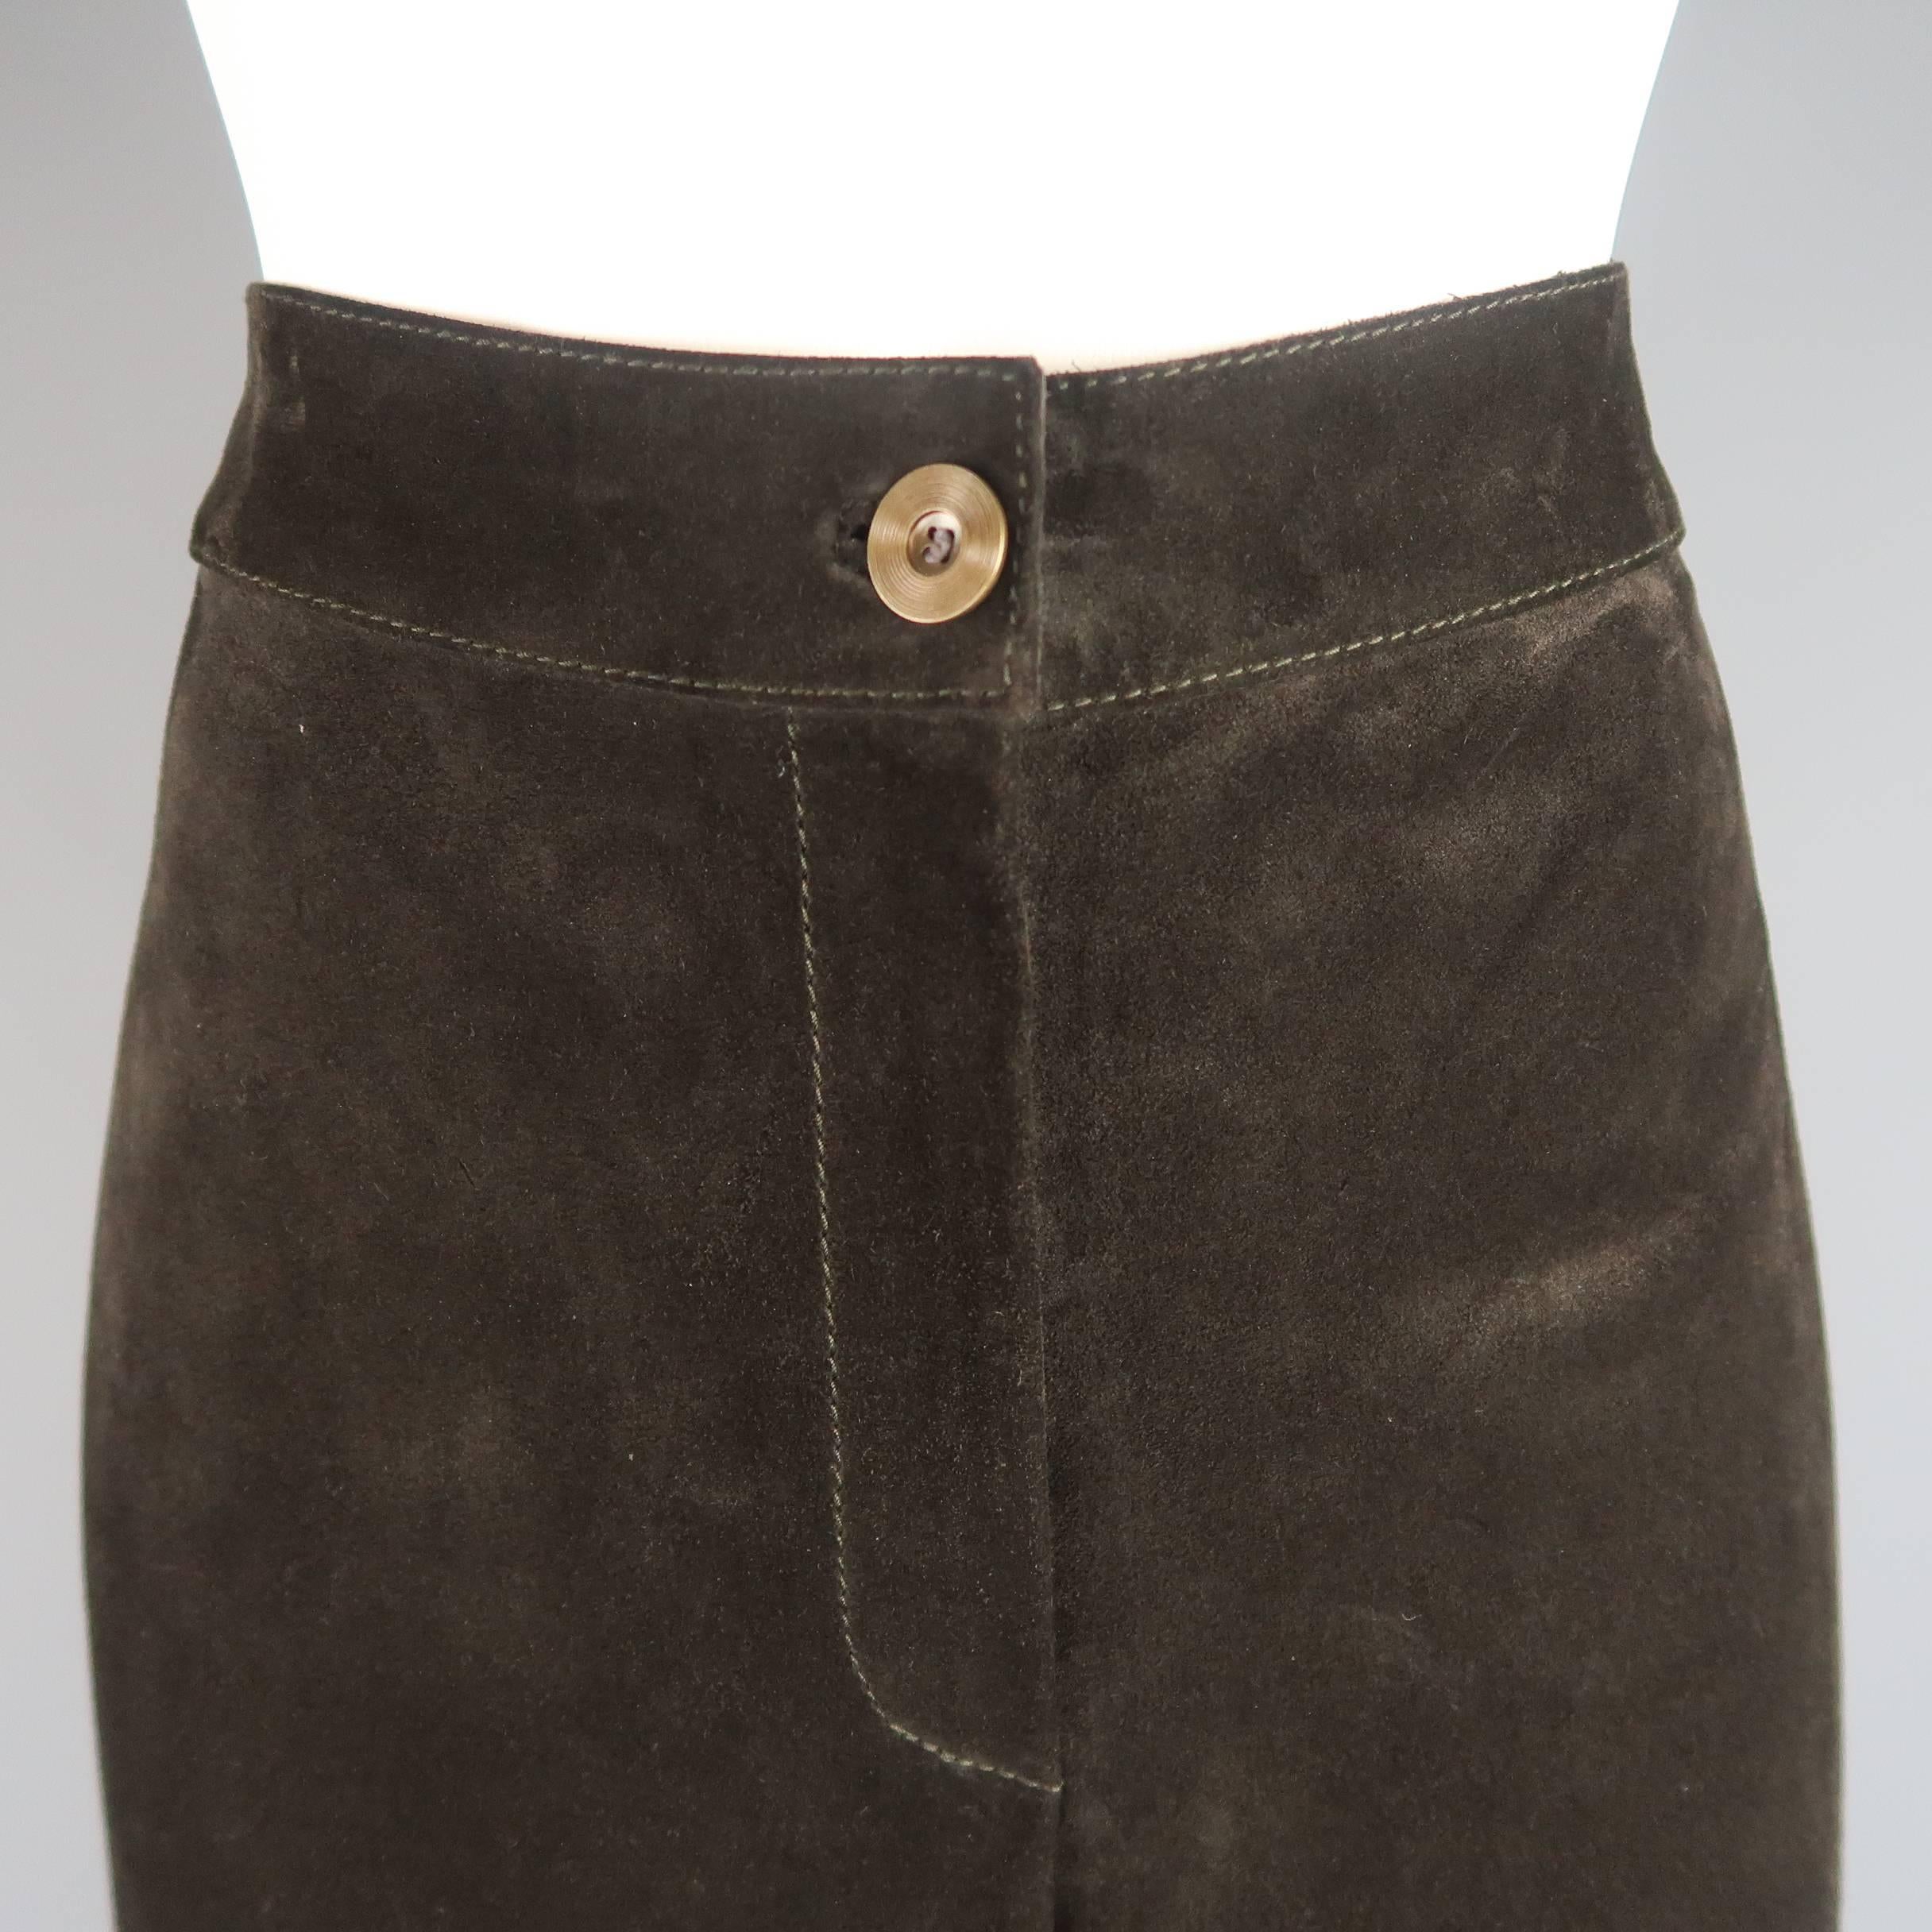 These fabulous VALENTINO pants comes in deep chocolate brown suede and feature a high rise, tailored leg, and flaired bell bottom with back, button detailed panels. Made in Italy.
 
Good Pre-Owned Condition.
Marked: 8
 
Measurements:
 
Waist: 32